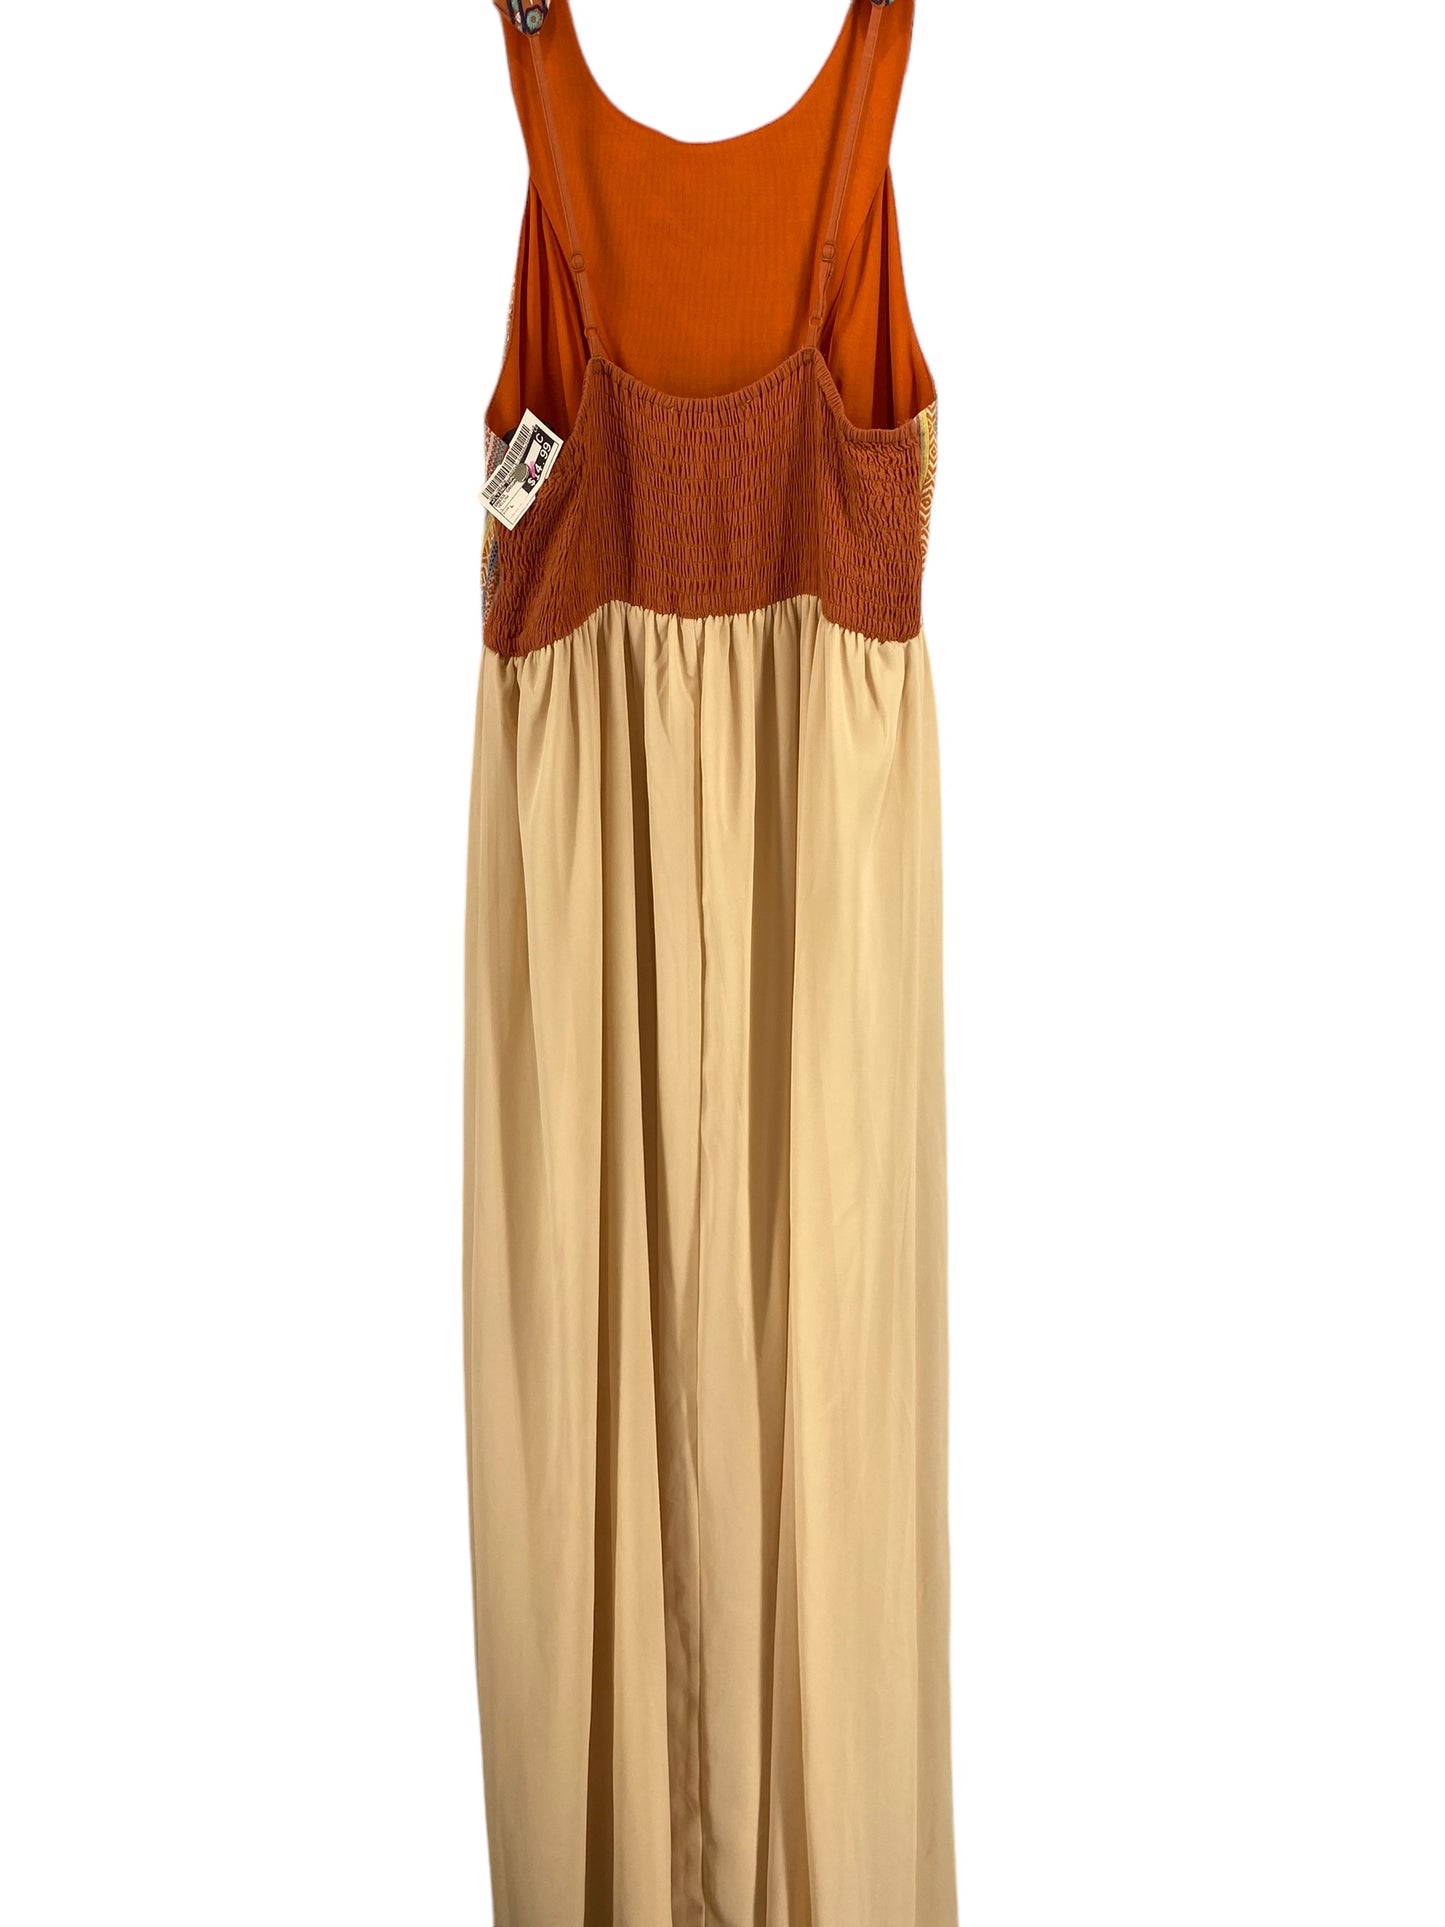 Dress Casual Maxi By Flying Tomato  Size: L